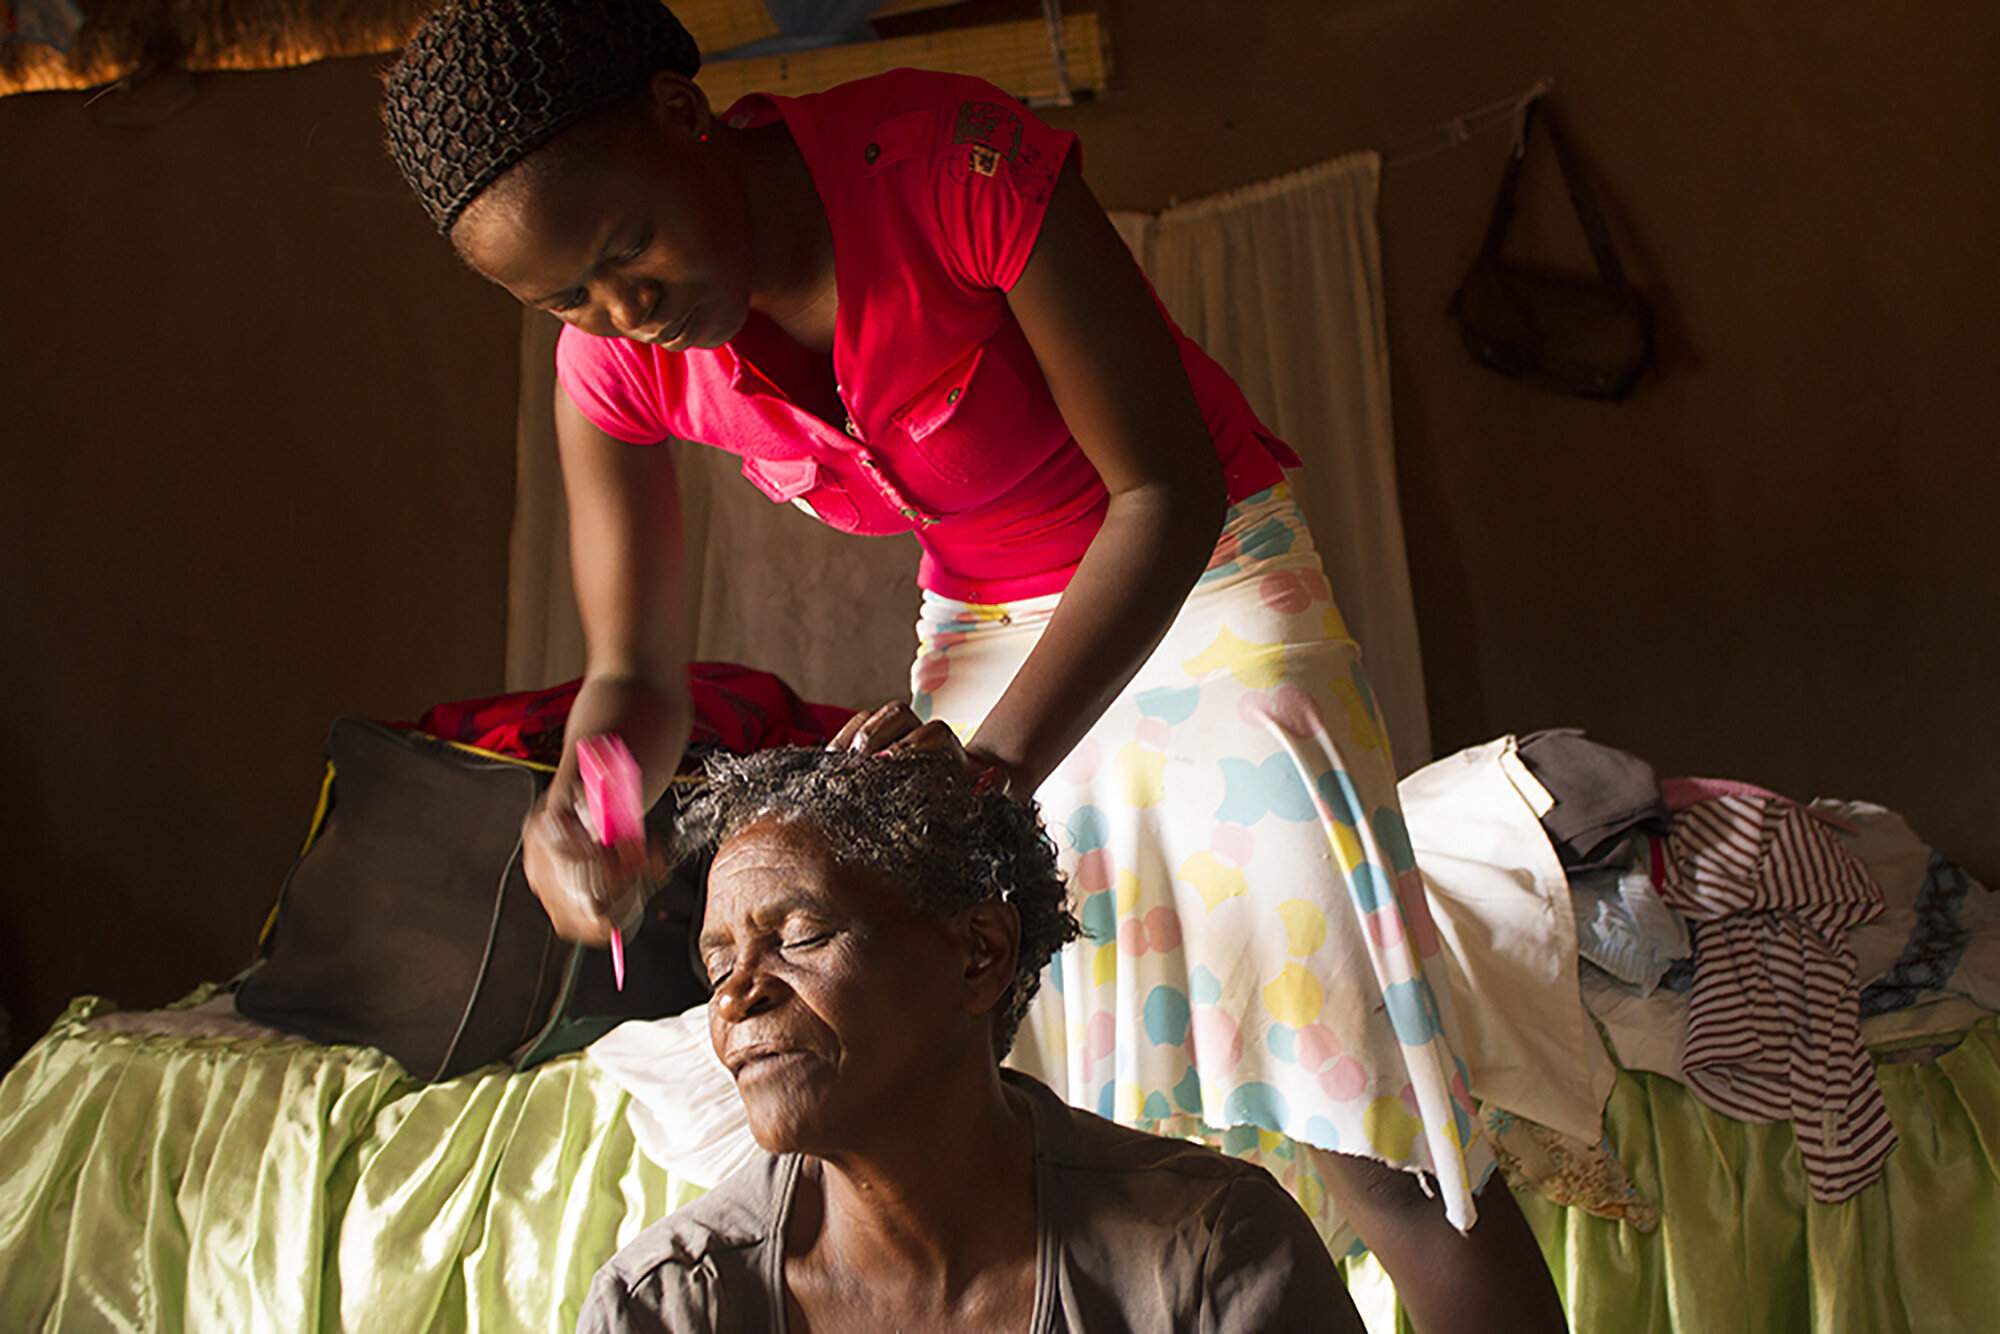  December 16, 2014: Matron (21), Gogo Mpofu's oldest granddaughter, does her grandmother's hair at their rural home in Nkayi. "In the old days, when I was younger, I always enjoyed straightening my hair. Now my grandchildren always make sure that I l